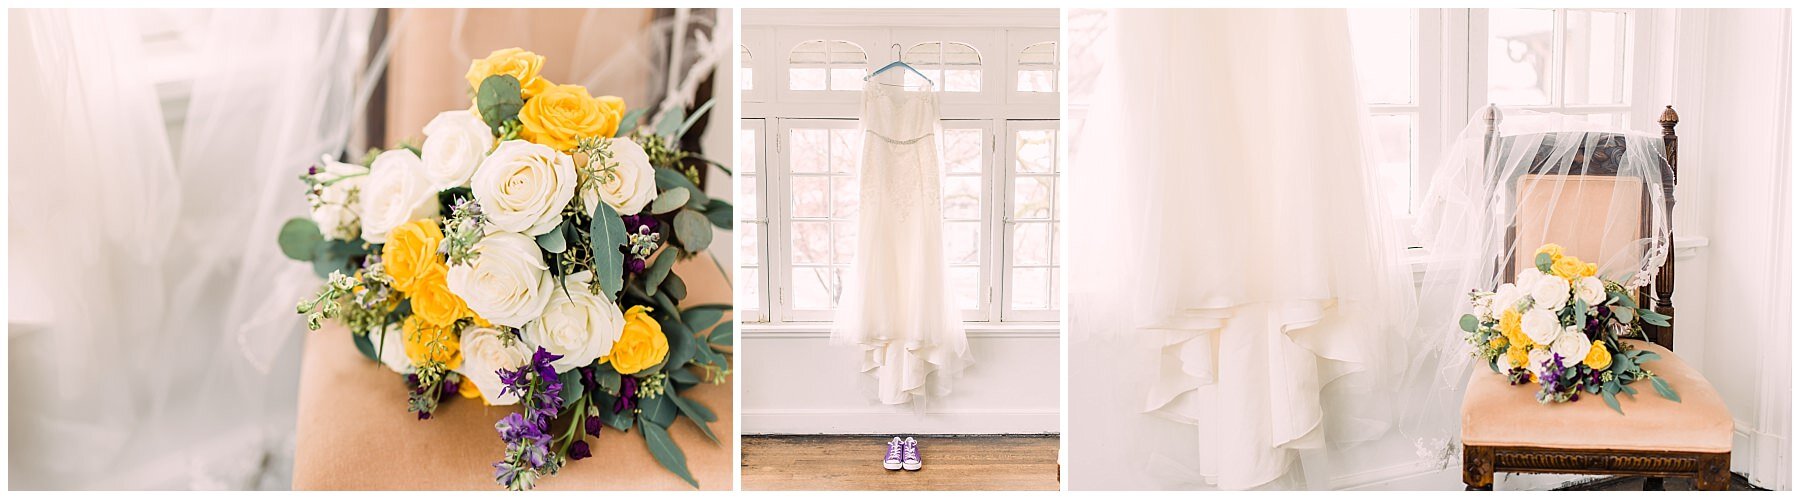 wedding details with upclose bouquet, wedding dress hanging in front of a window and the dress beside the bouquet